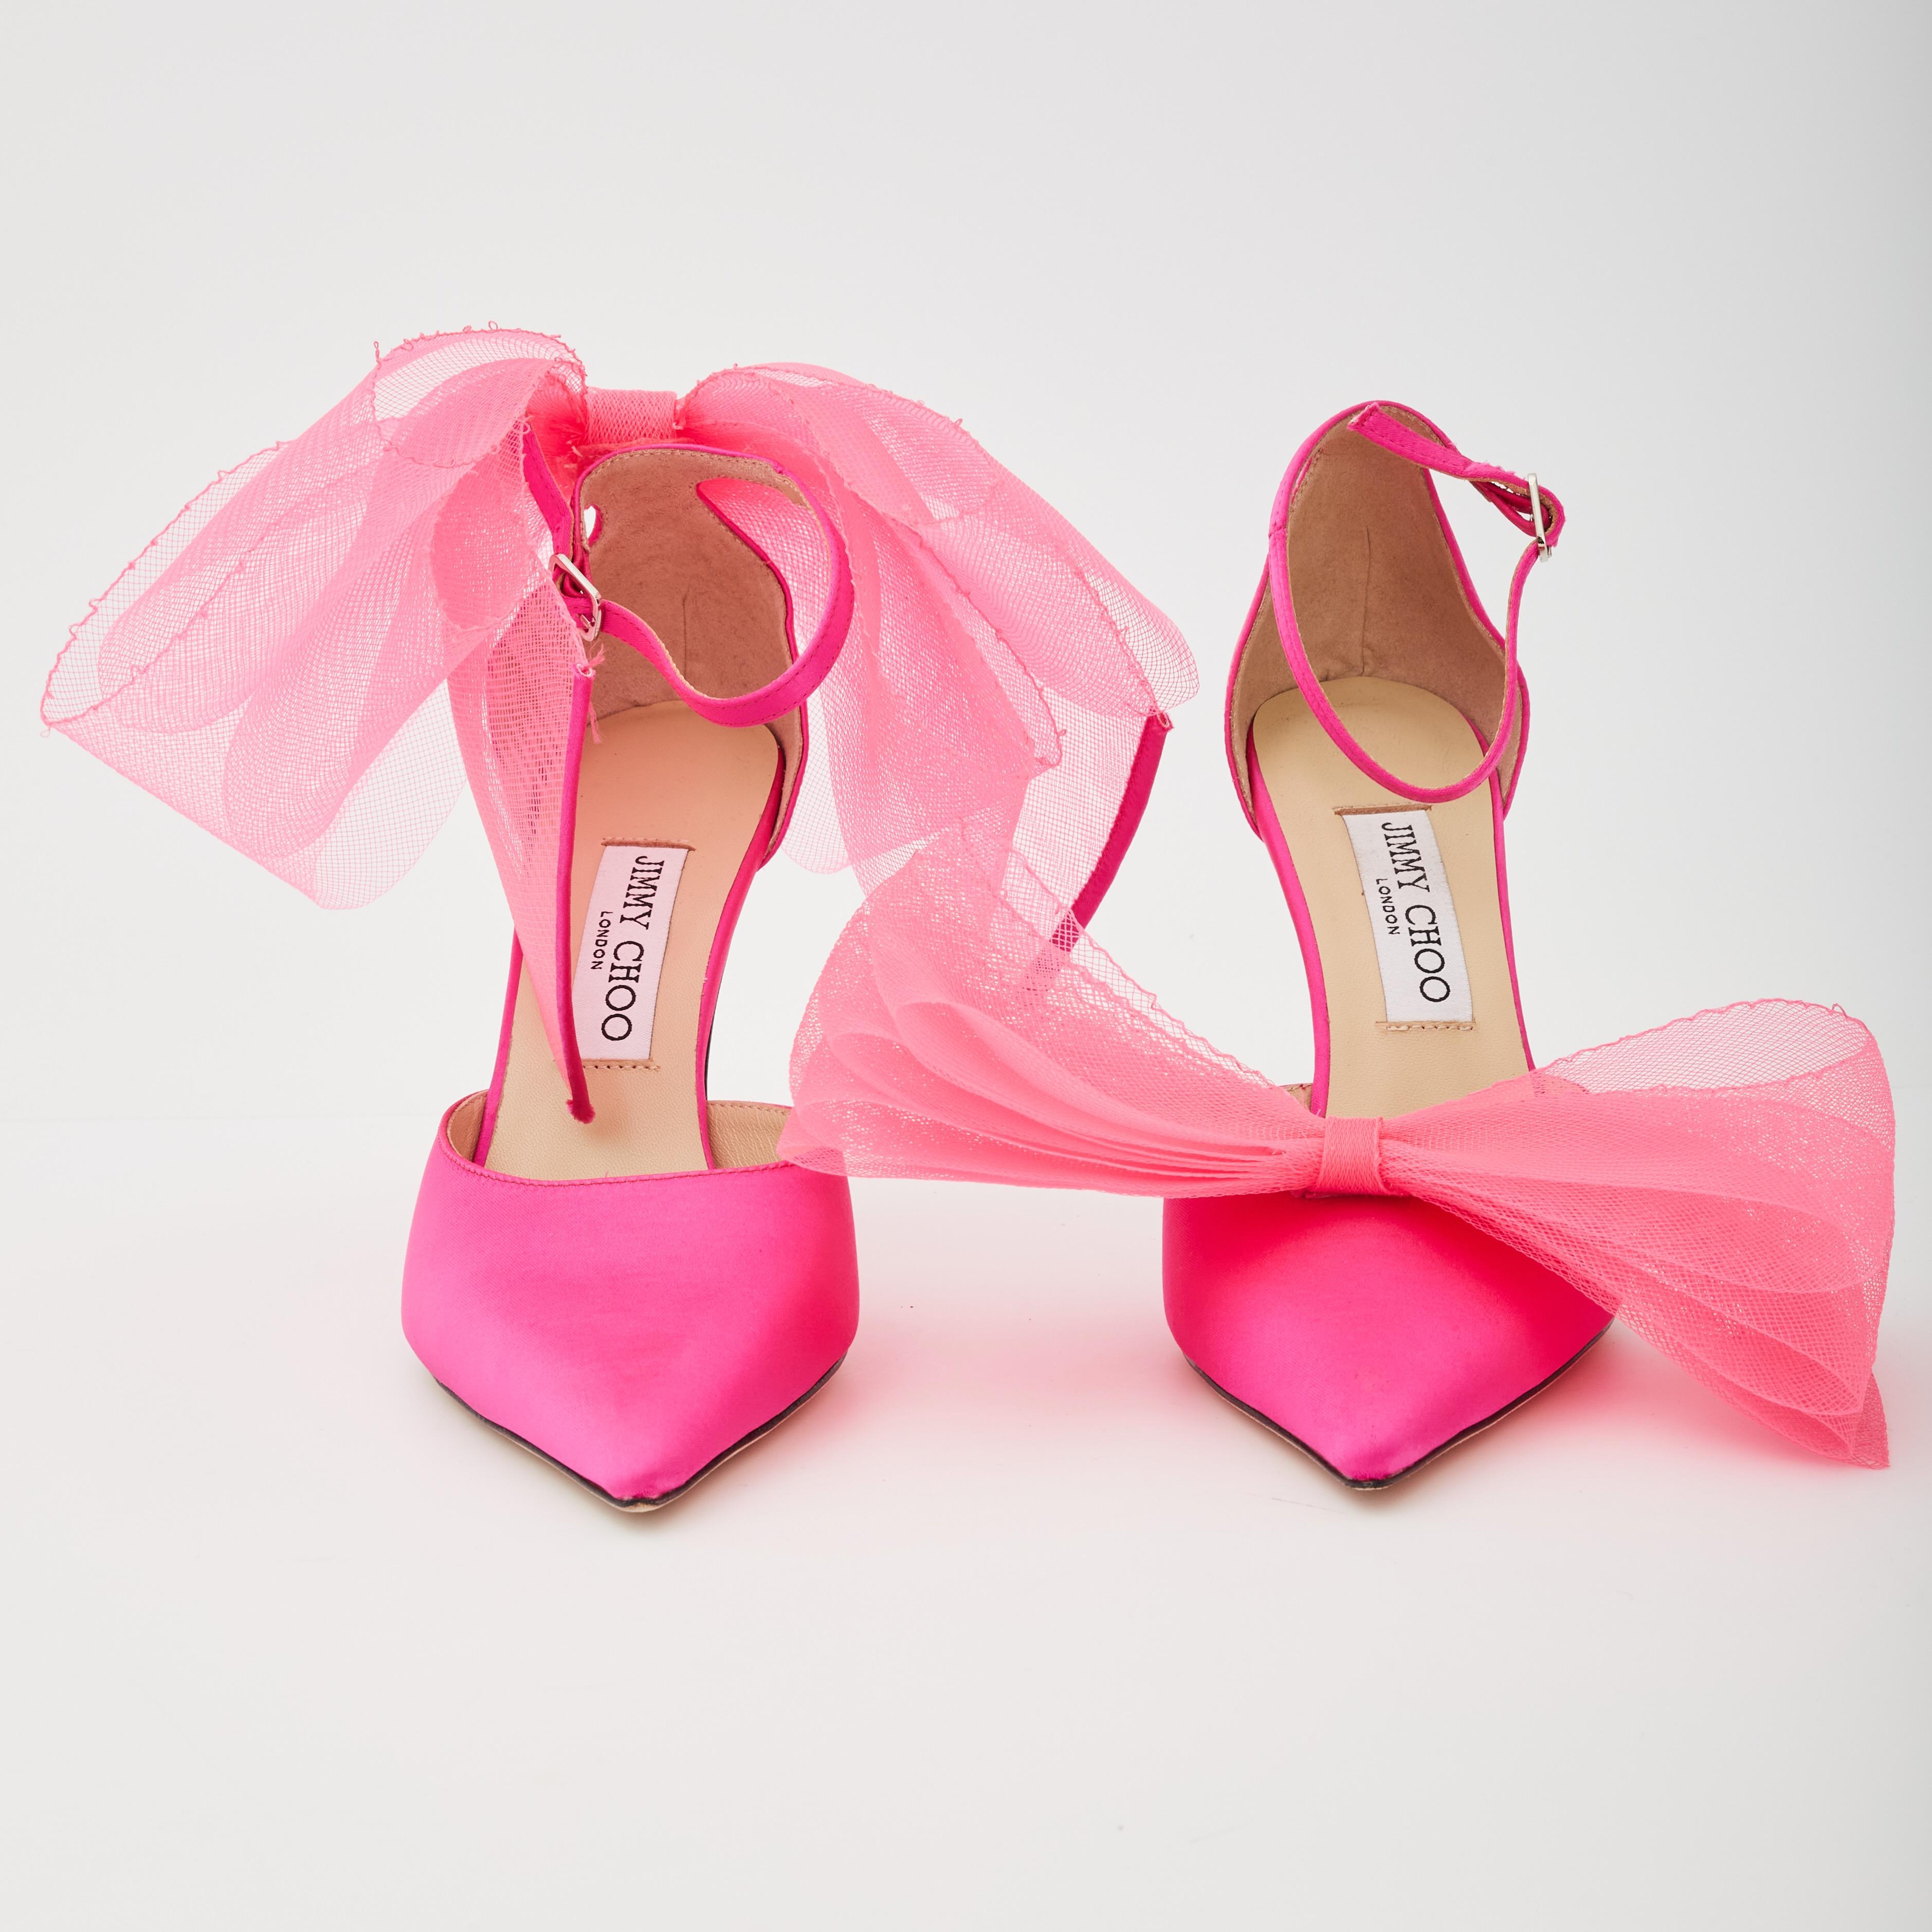 These asymmetrical Averly pumps are made with fuchsia grosgrain and decorated with two oversized bows that are intricately woven, hand tied and sewn on for a dramatic finish. The slim heel and ankle strap with side buckle fastening make for a